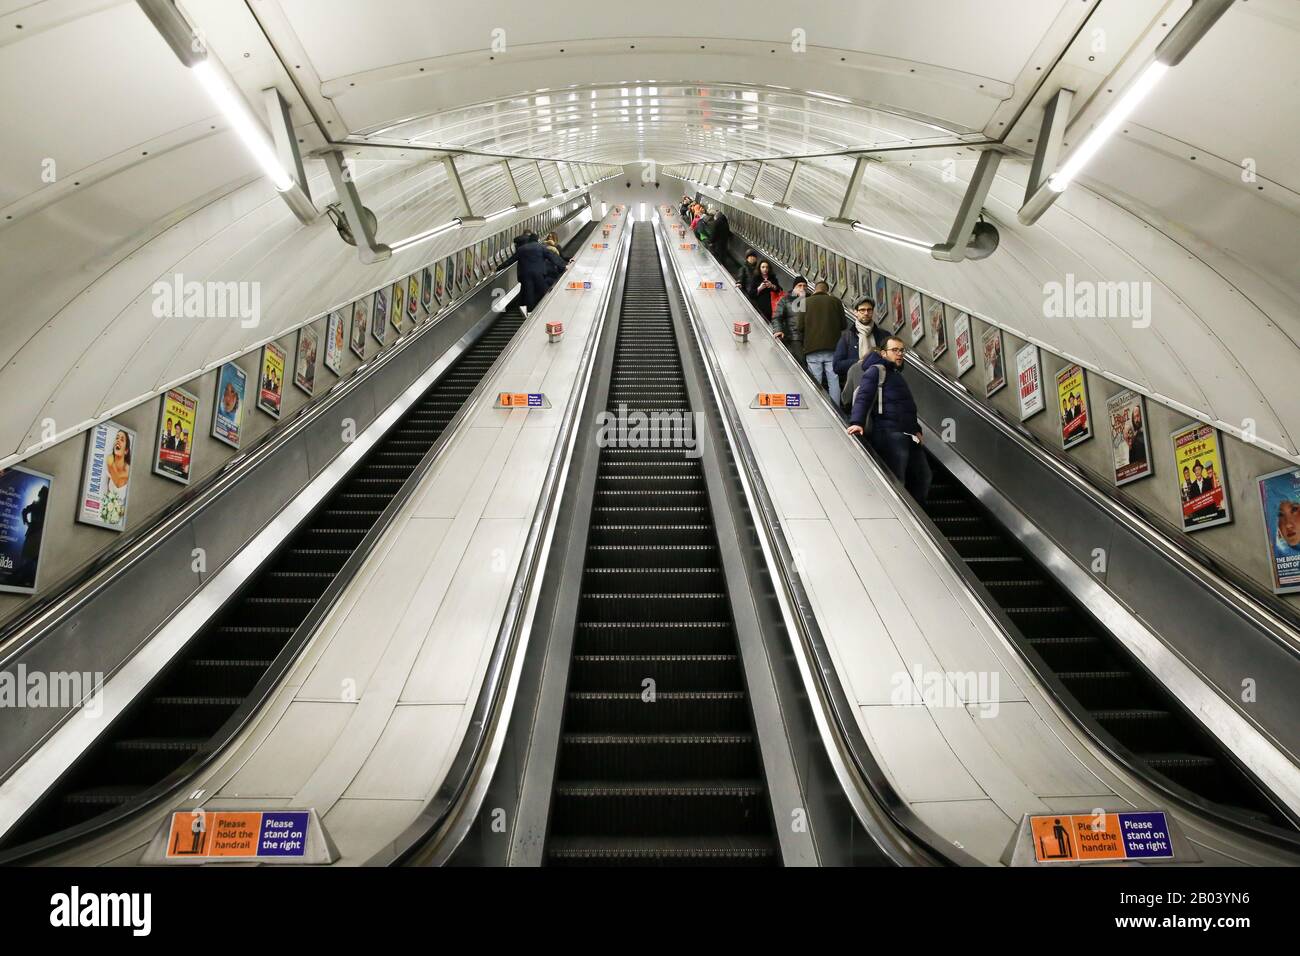 The escalator at Leicester Square underground station in central London, UK Stock Photo